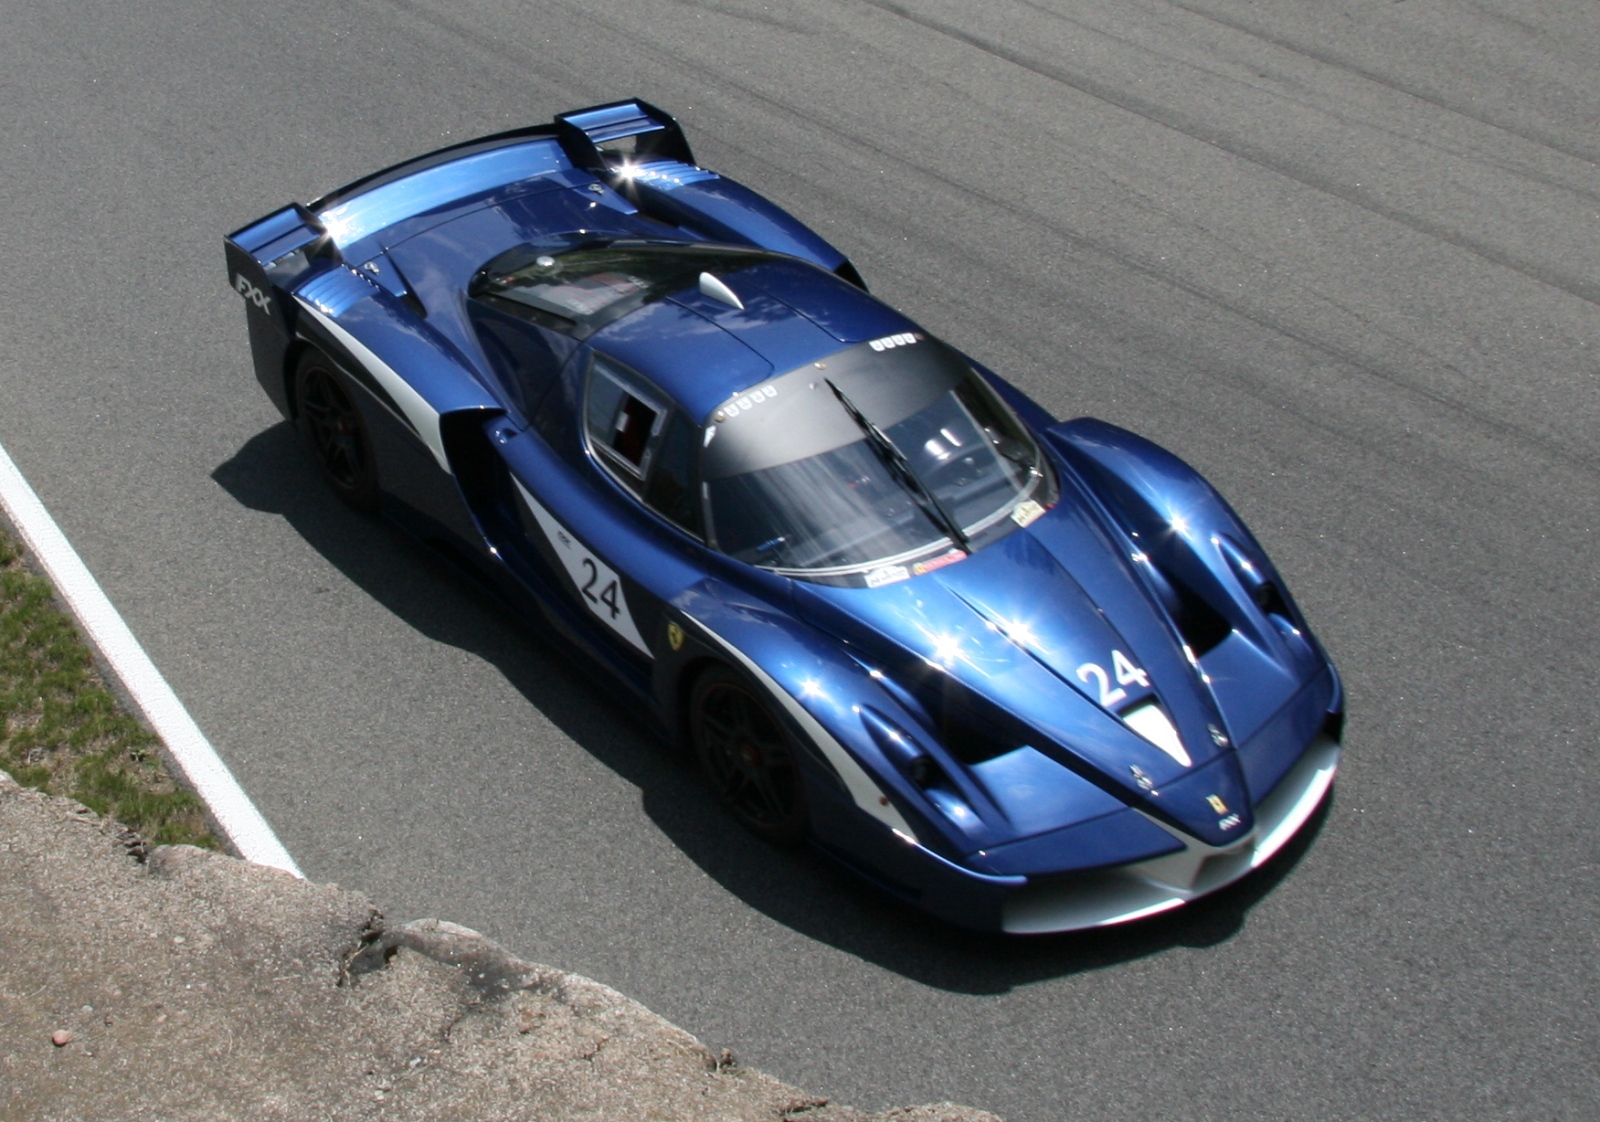 Blue Ferrari FXX wallpapers and images   wallpapers, pictures, photos